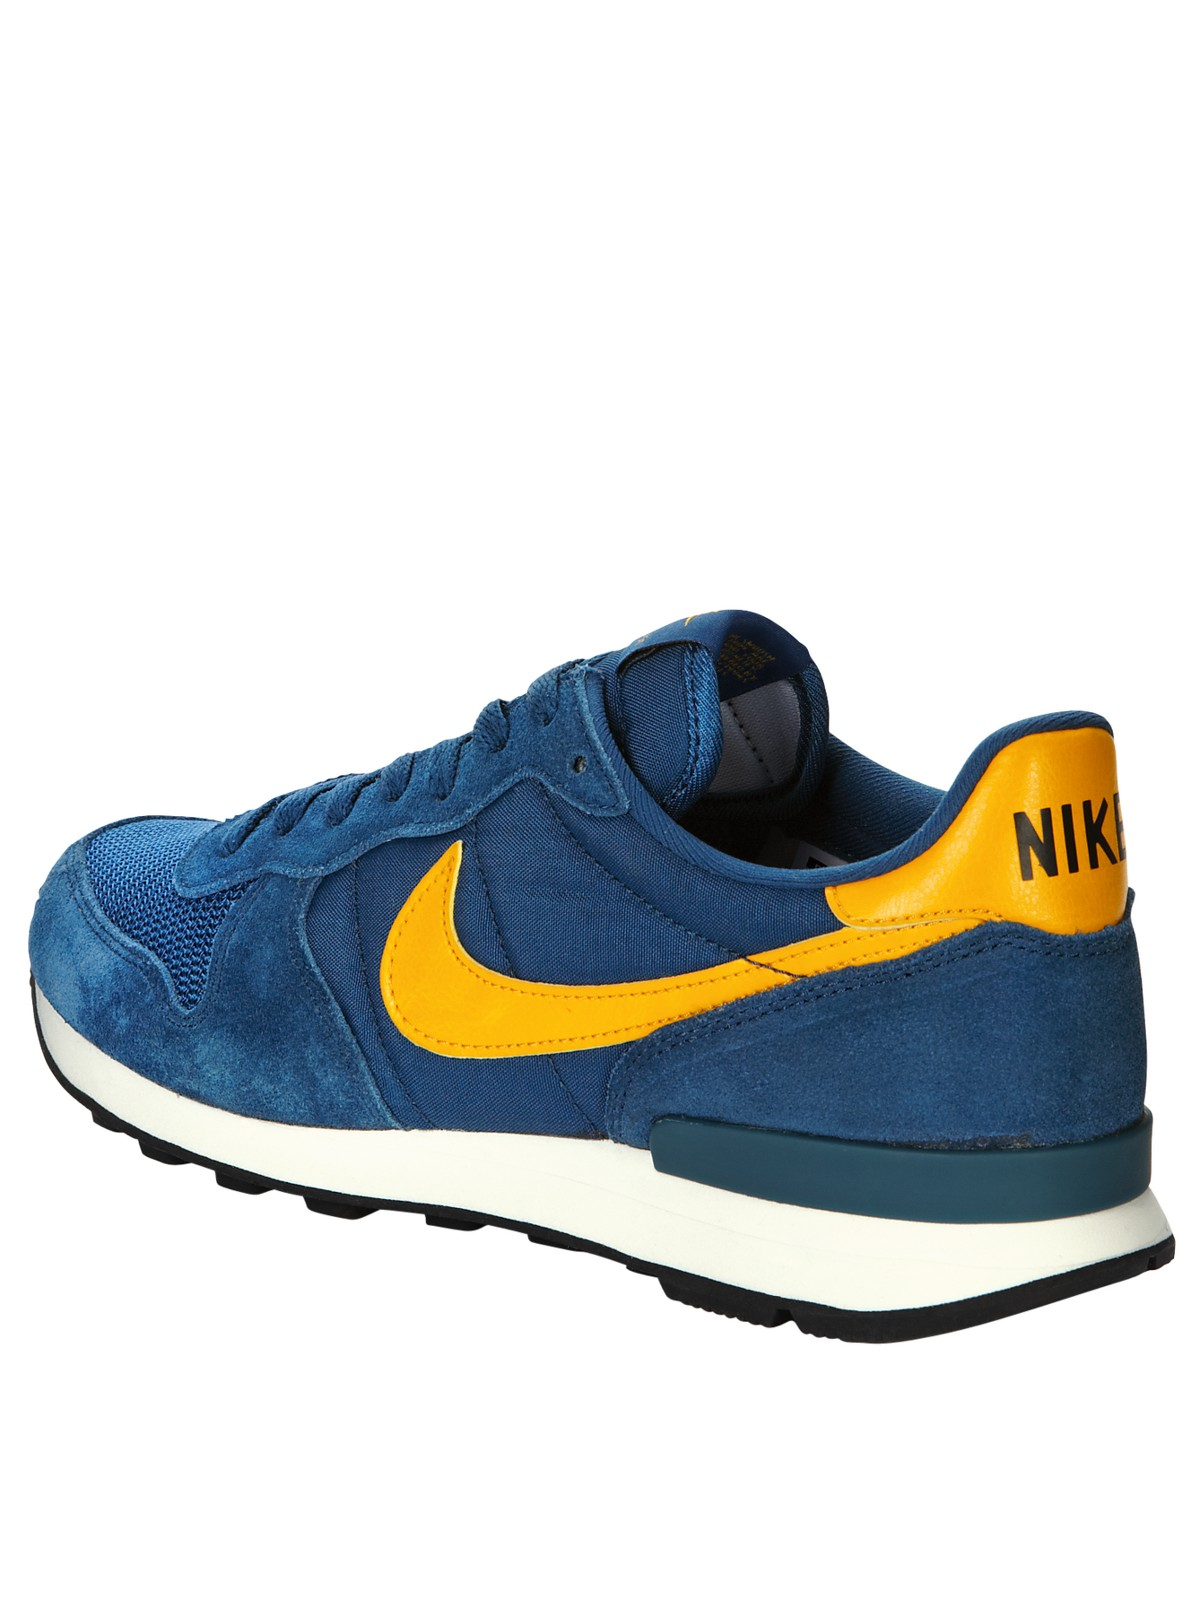 blue and yellow nike trainers